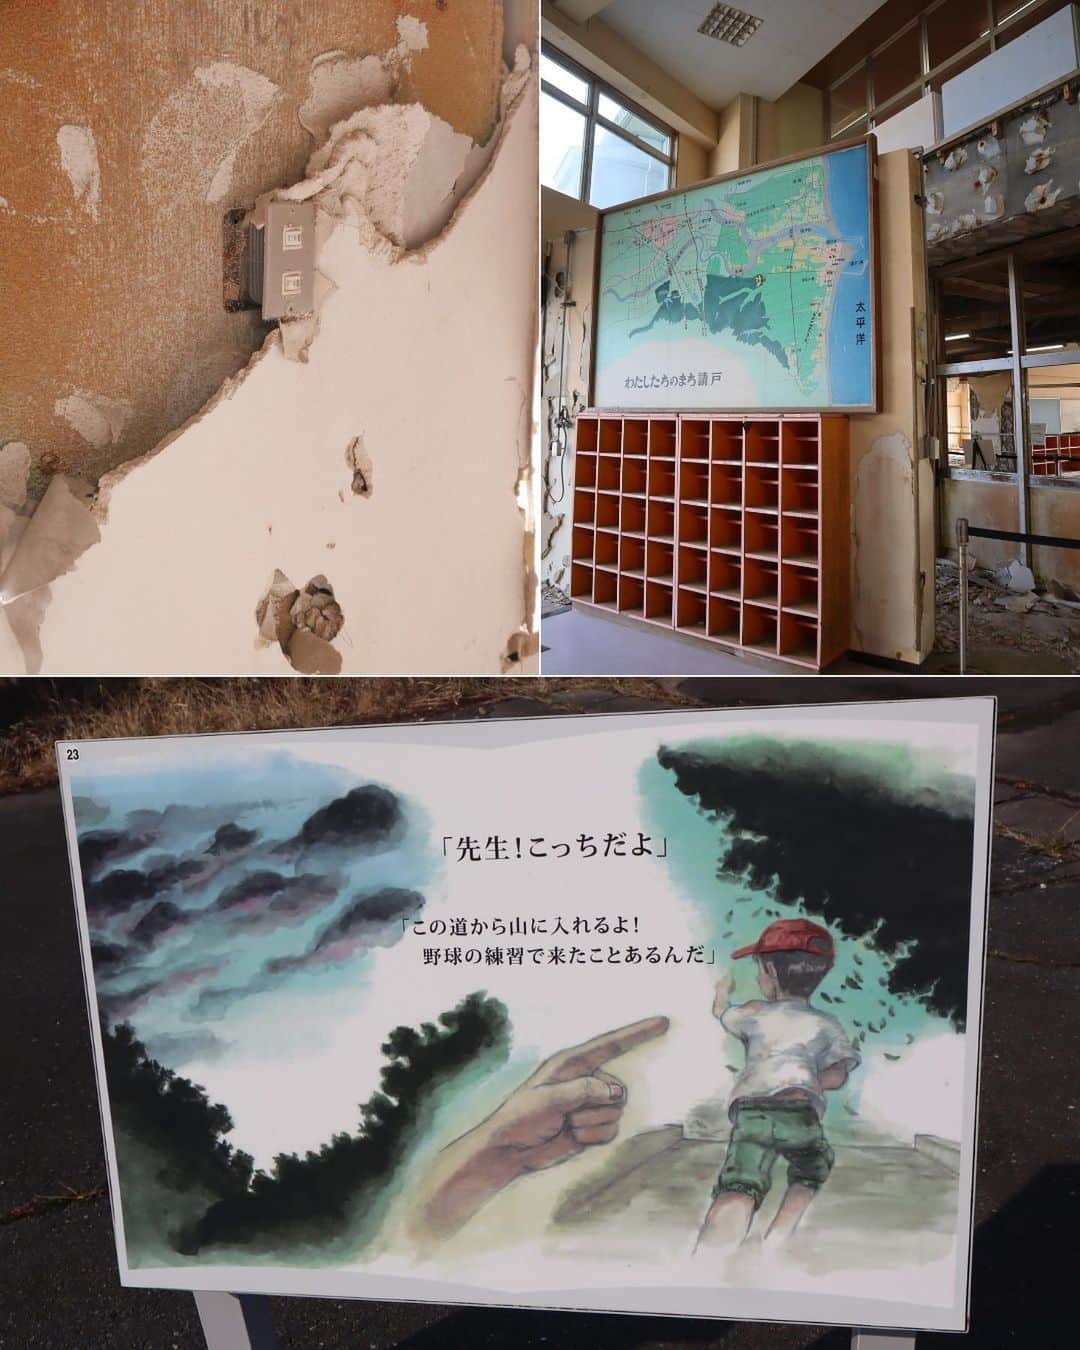 Rediscover Fukushimaさんのインスタグラム写真 - (Rediscover FukushimaInstagram)「Step inside the Ukedo Elementary School building and you’ll find dark walls, hanging cables, and rubble. Yet, many call this place miraculous. While the building reflects the painful story of a disaster, it also stands as an enduring symbol of hope.  📍The remains of the Ukedo Elementary School (震災遺構浪江町立請戸小学校) are in Namie Town, in the coastal area of Fukushima.  Teachers at the school, located 300 meters from the ocean, swiftly and safely evacuated all students just in time before the towering tsunami waves engulfed the area on March 11, 2011.  The school building sustained great damage, but it did not collapse. Residents asked for it to be preserved as a testimony of the destruction of the disaster, and today it stands as a symbol of the community of Ukedo.  Visitors can see the remnants of the school, which remain largely untouched, with debris, broken floors, smashed objects, and collapsed furniture.   🌐 Signs are in Japanese, but you can scan a QR code at the entrance and access the explanations in English on your phone (Wifi is available onsite).   🎧 Until December 31st, 2023, you can access a free audio guide on your phone from the Hamadori Coastal Area website (you will also find their QR code at the entrance).  🎟️General Admission is 300 yen.  ℹ️ We have recently posted a Visitor’s Guide to the Ukedo Elementary School on our website (link in stories) covering the story of the school, access information, and advice for visitors.  If you have already visited this school, please let us know your impressions in the comments.  #fukushima #visitfukushima #ukedo #ukedoelementaryschool #namie #namietown #visitjapanjp #meaningfultourism #meaningfultravel #visittohoku #hamadori #tohokutrip #educationaltravel #311」8月17日 13時20分 - rediscoverfukushima